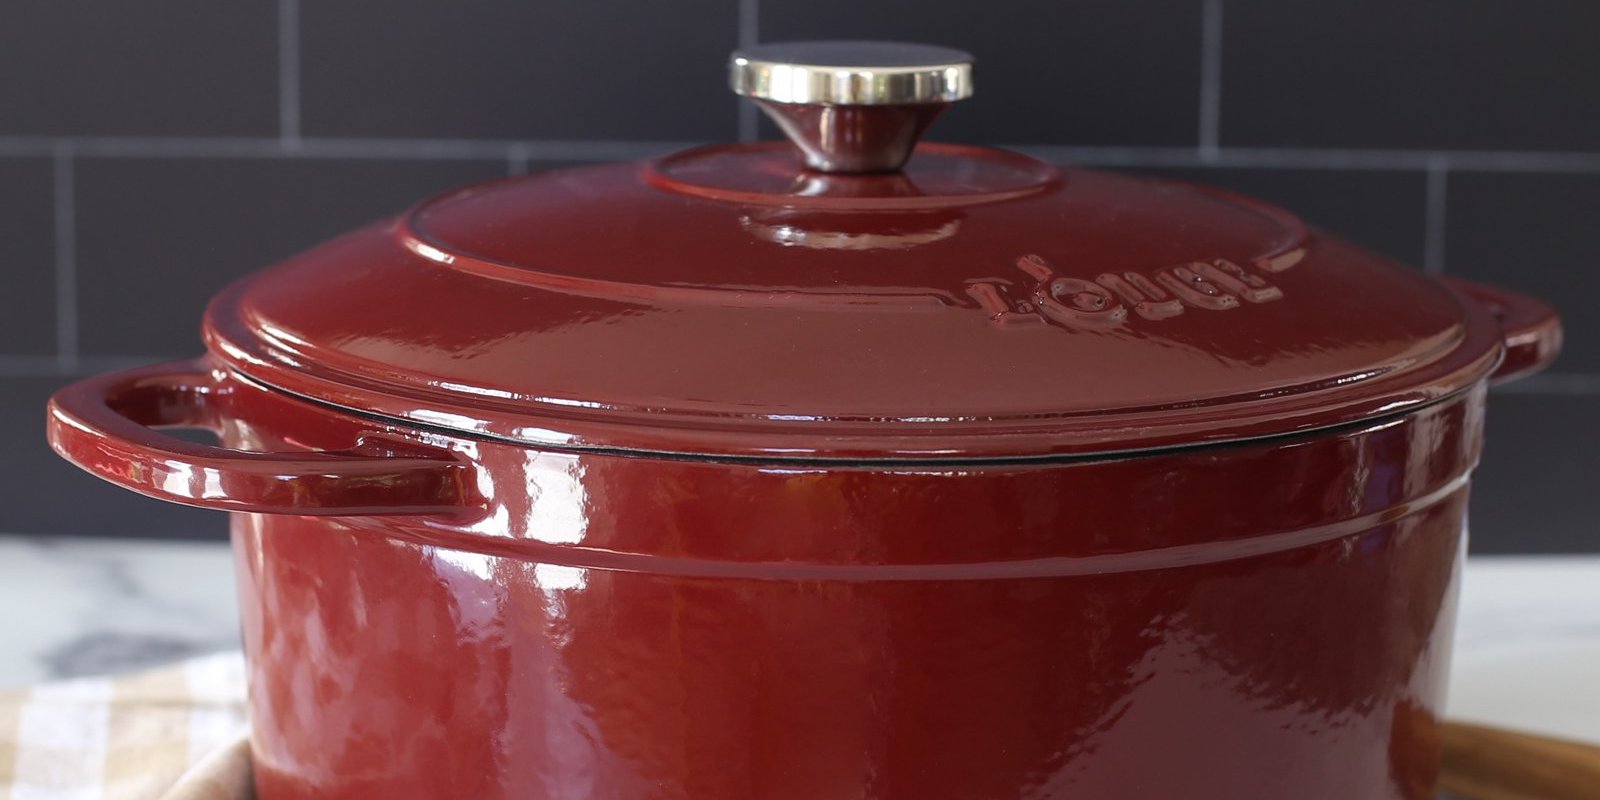 Lodge makes some of the best cast iron Dutch ovens, now starting at $50  lows (Up to 50% off)